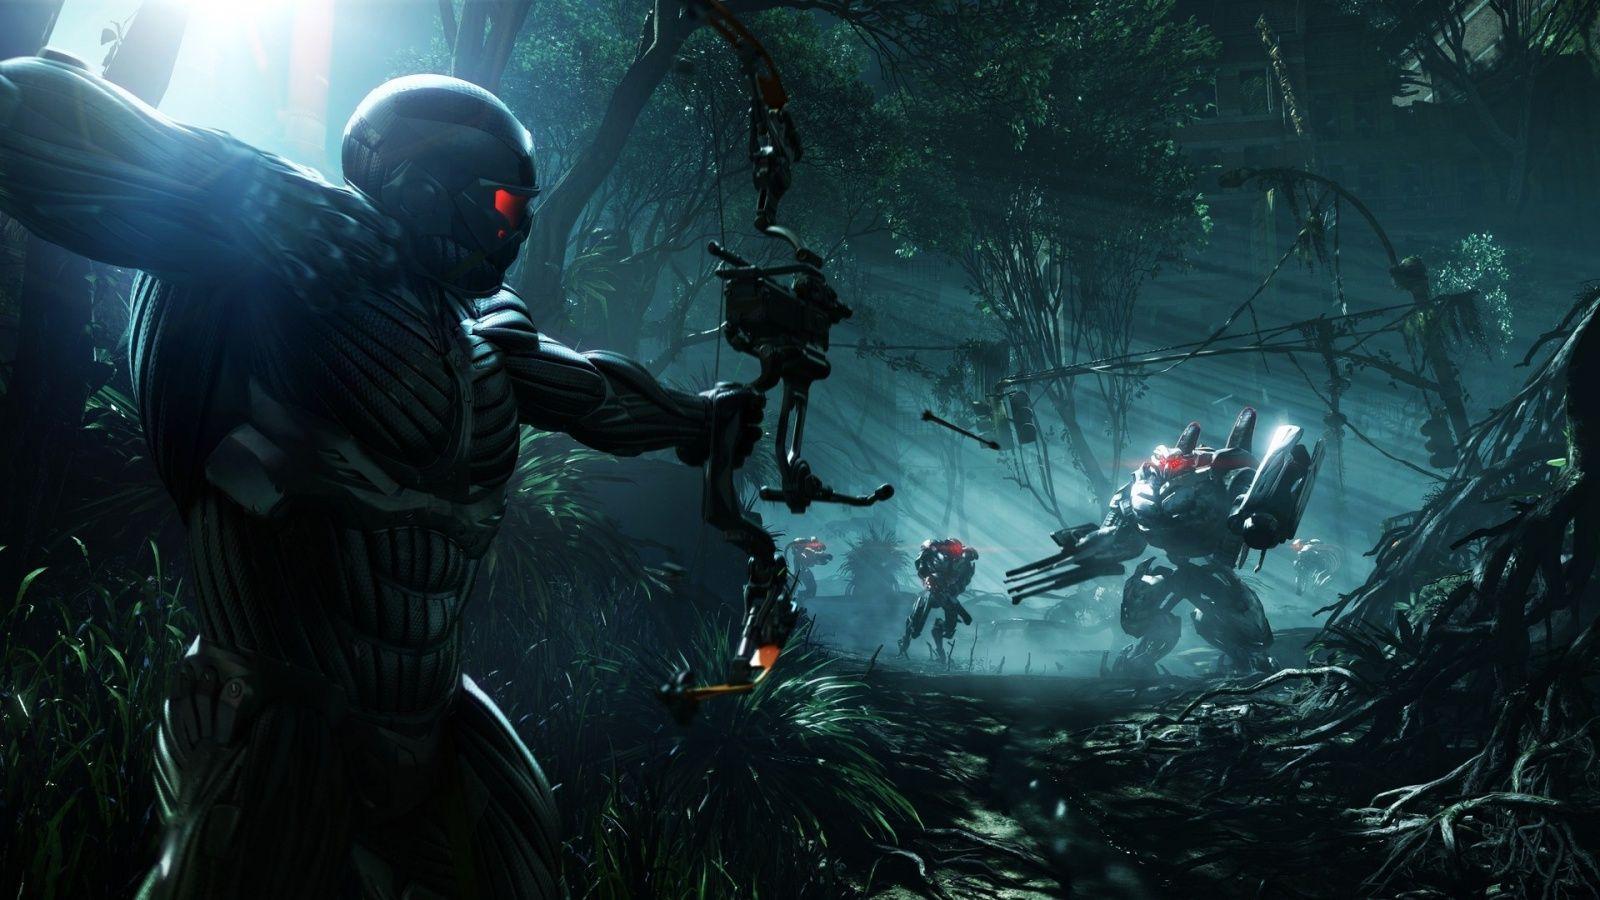 Crysis 3 background in 1600x900 resolution. HD & Widescreen